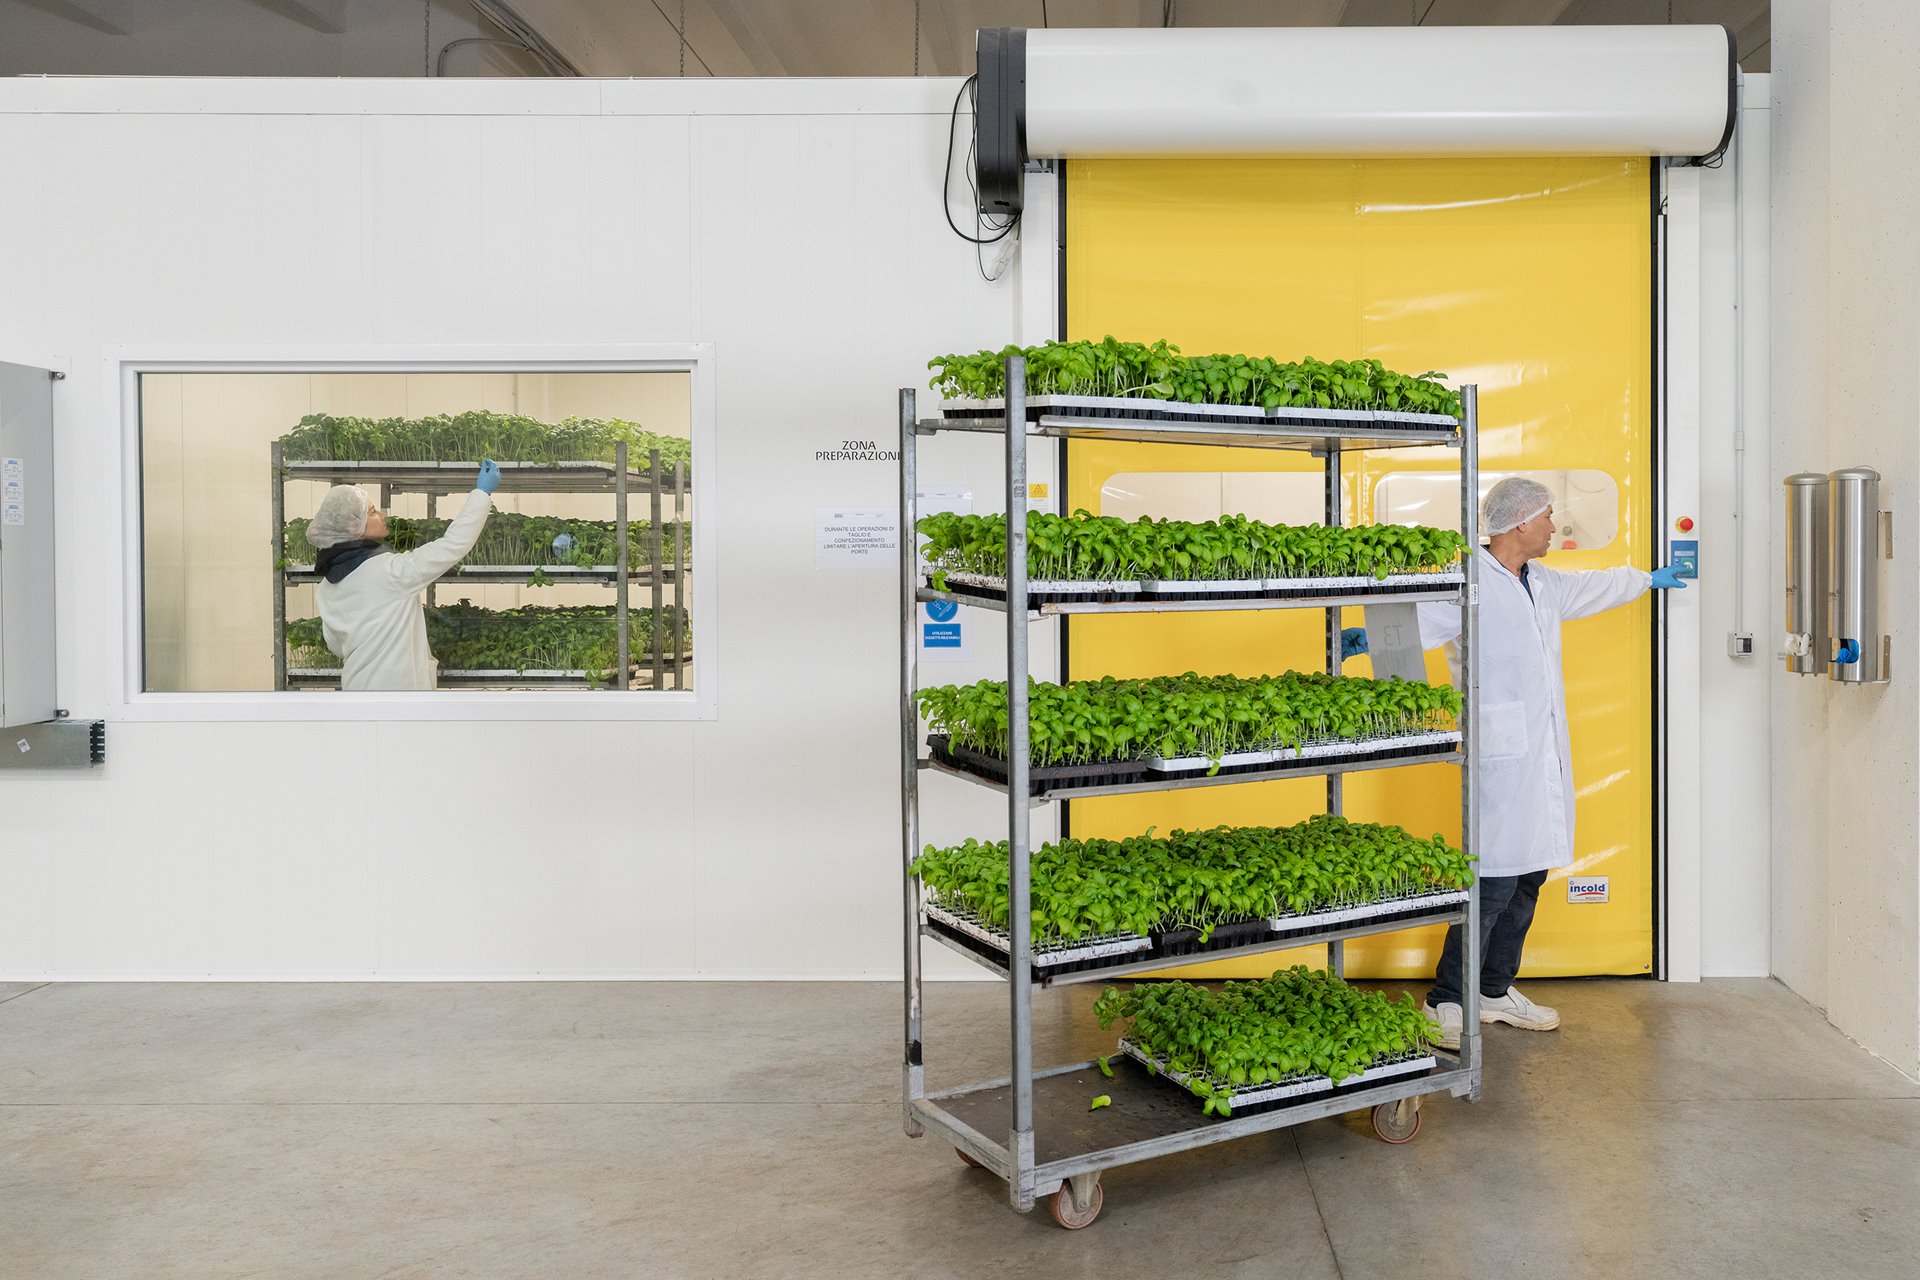 A worker transports seedlings at a vertical farm, near Milan, Italy. Crops grown in vertical stacks increase efficiency of land use, and reduce water consumption. According to research published in the <em>International Journal of Agriculture, Environment and Food Sciences</em>, the yield from vertical farm crops is around times higher that of normally produced field crops, and saves about 70-95 percent on water.